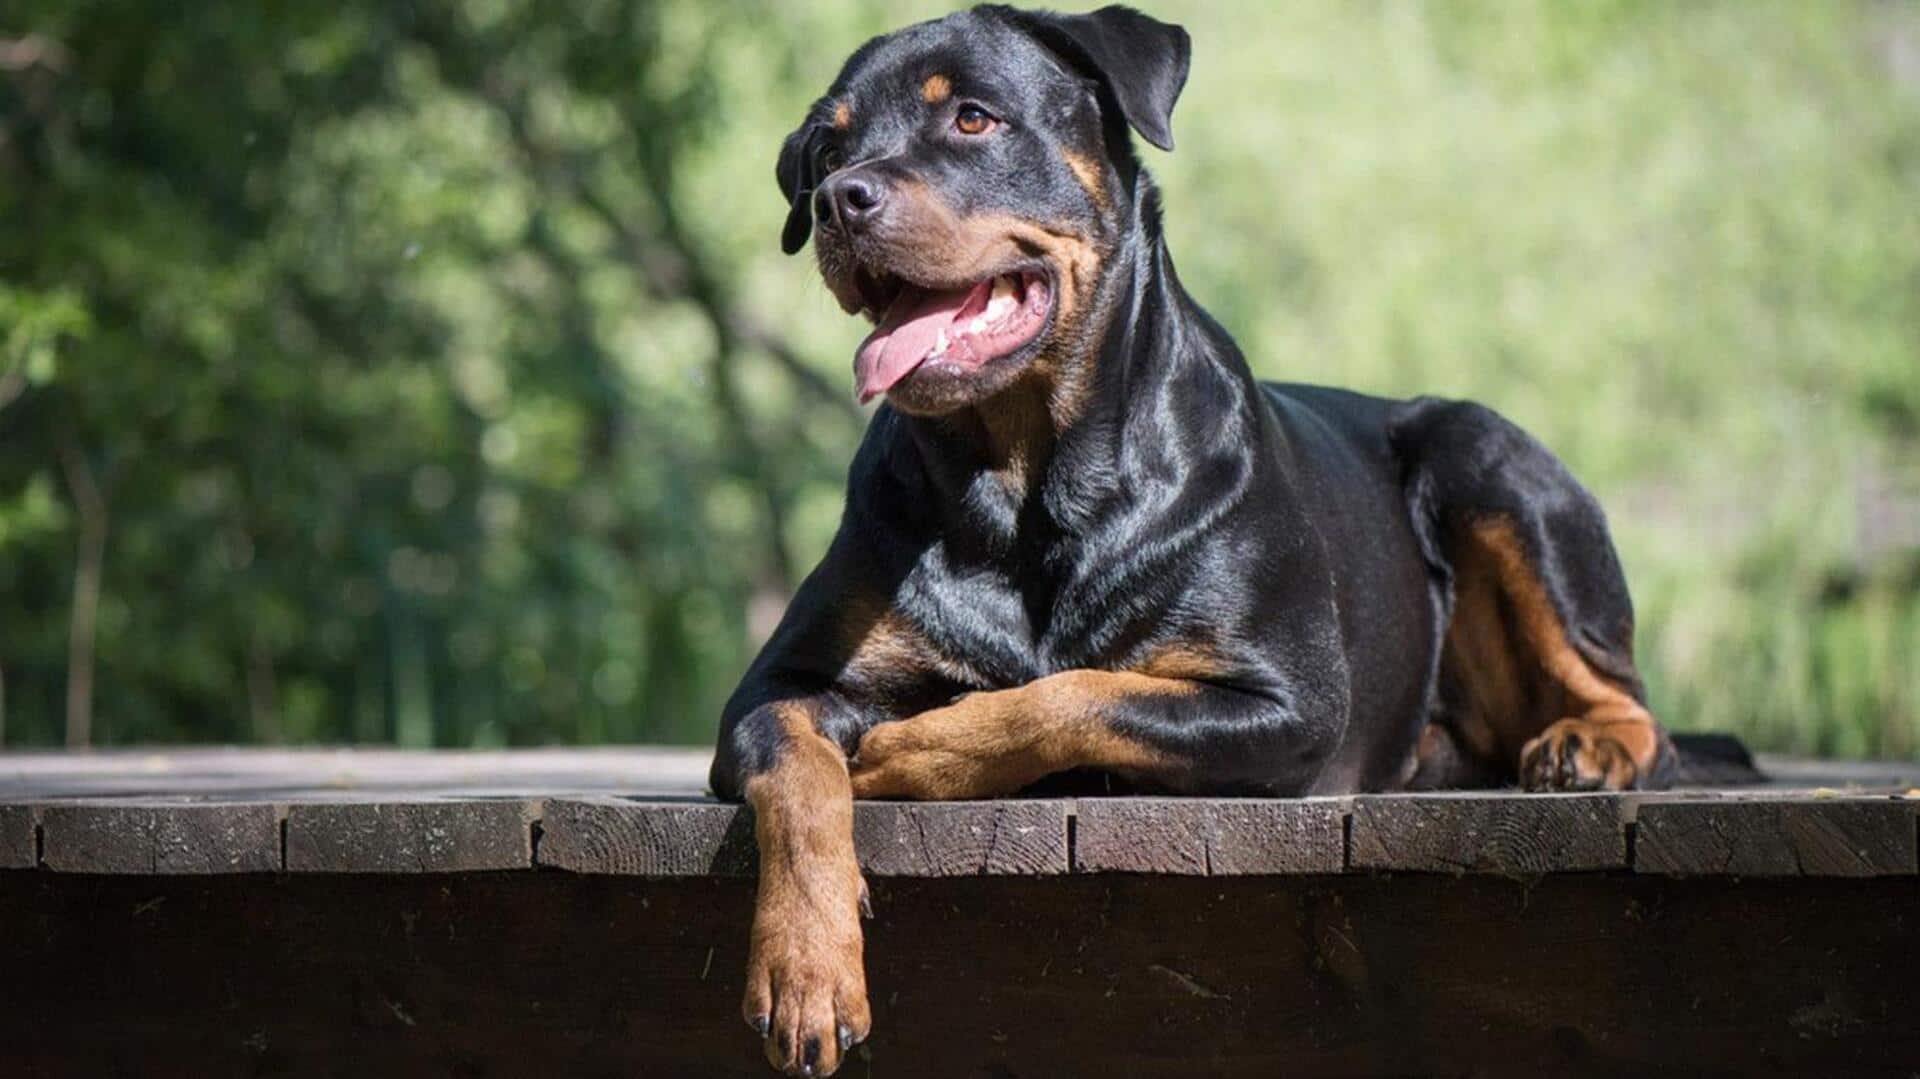 Got a Rottweiler at home? Practice these training tips